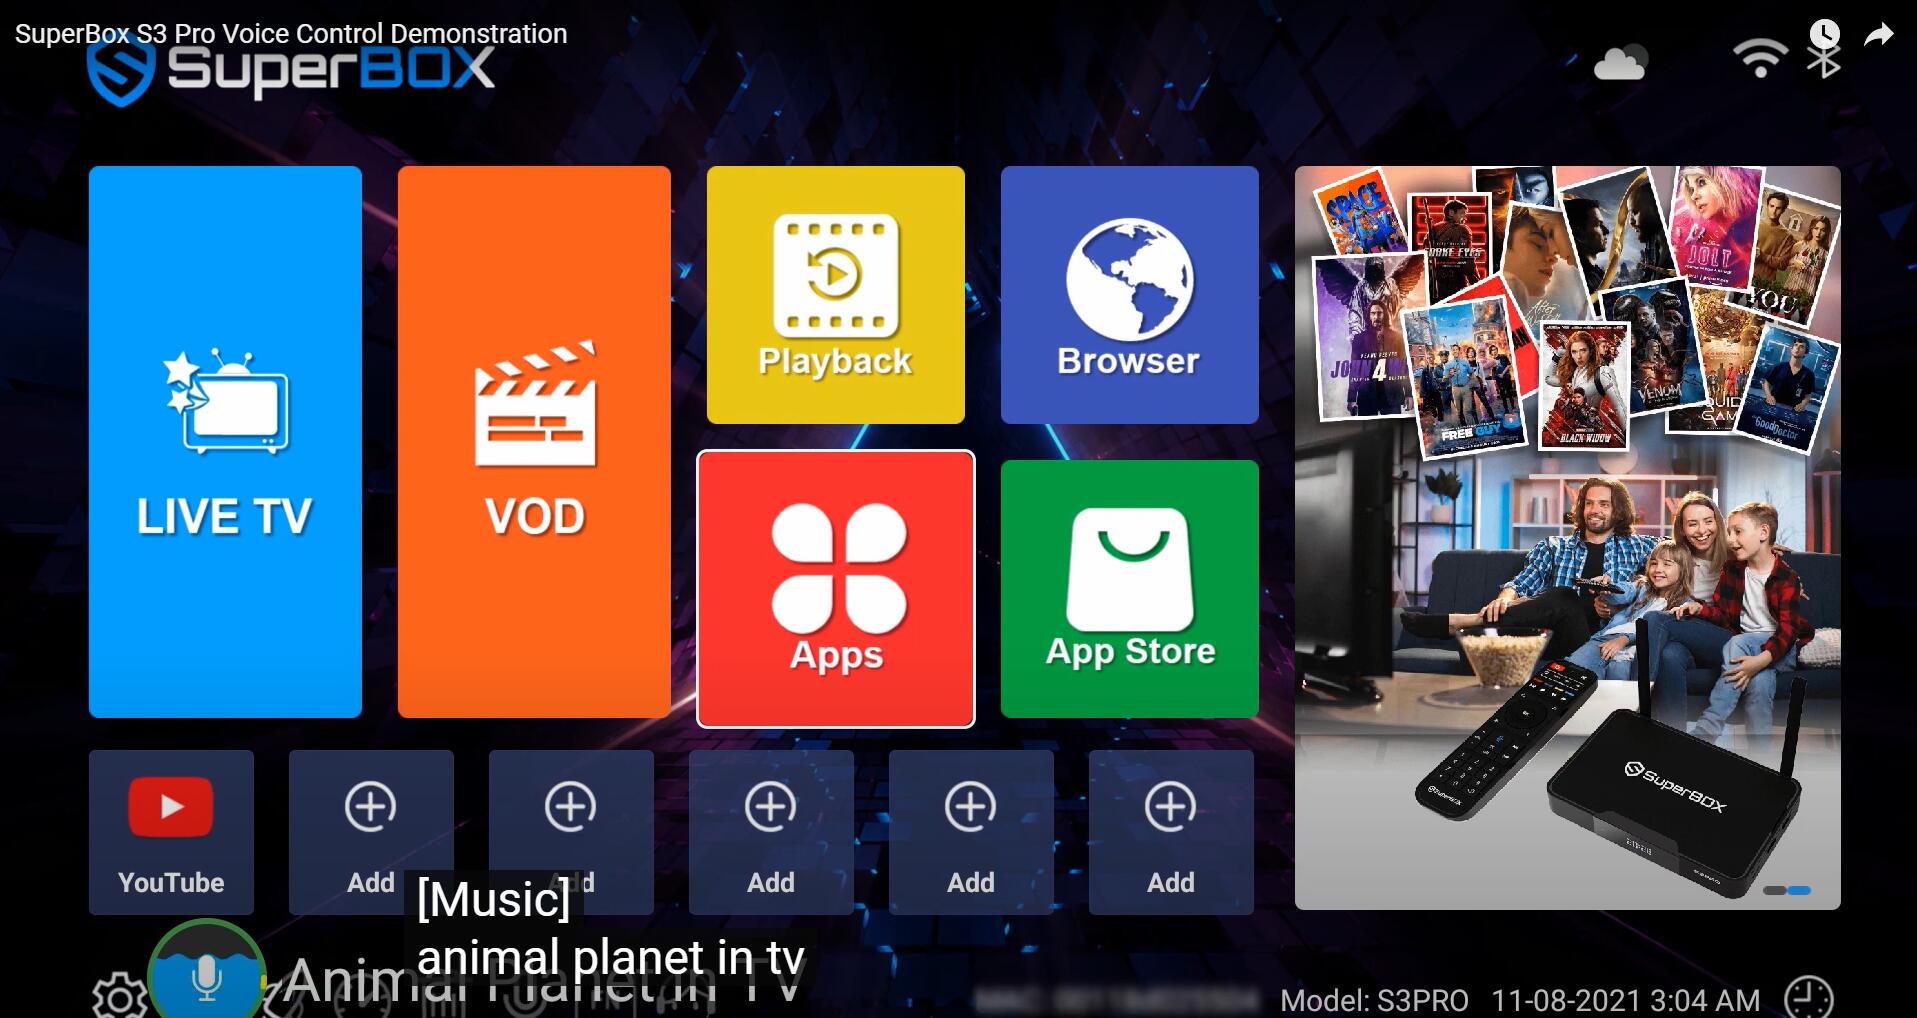 How to use Smart Remote Voice Controller for SuperBox S3 Pro?